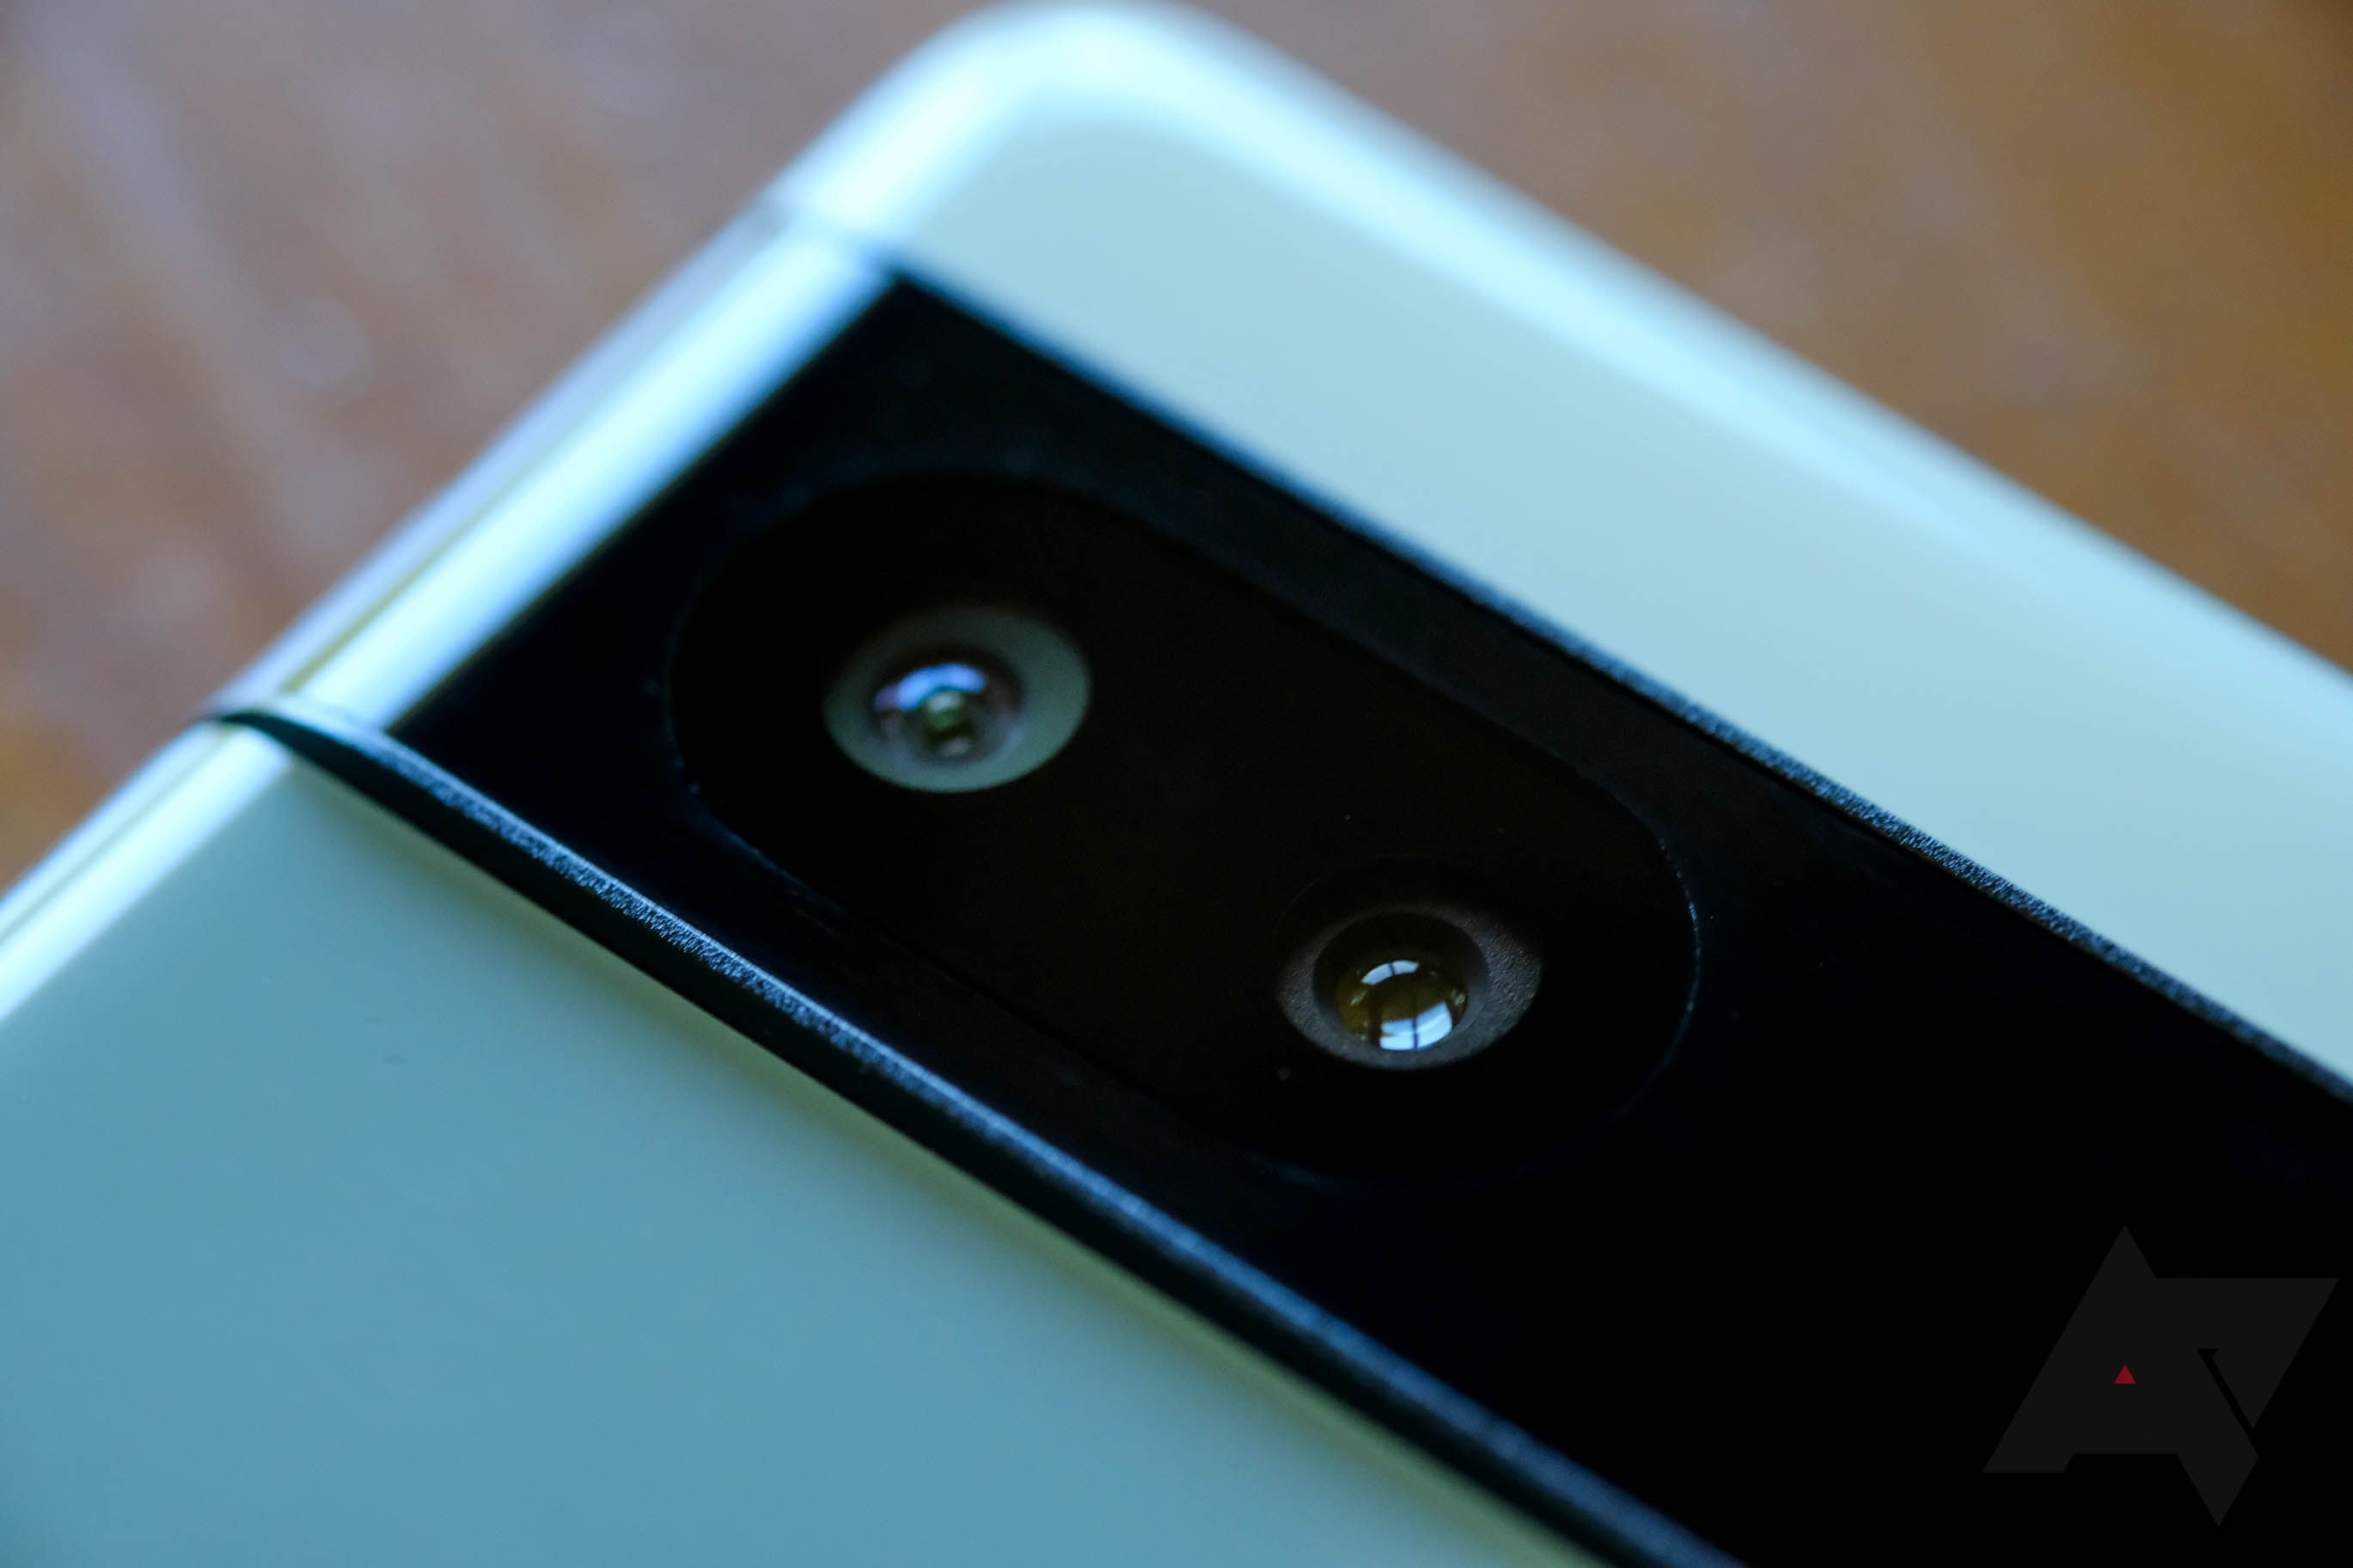 How important is camera performance when buying a phone?